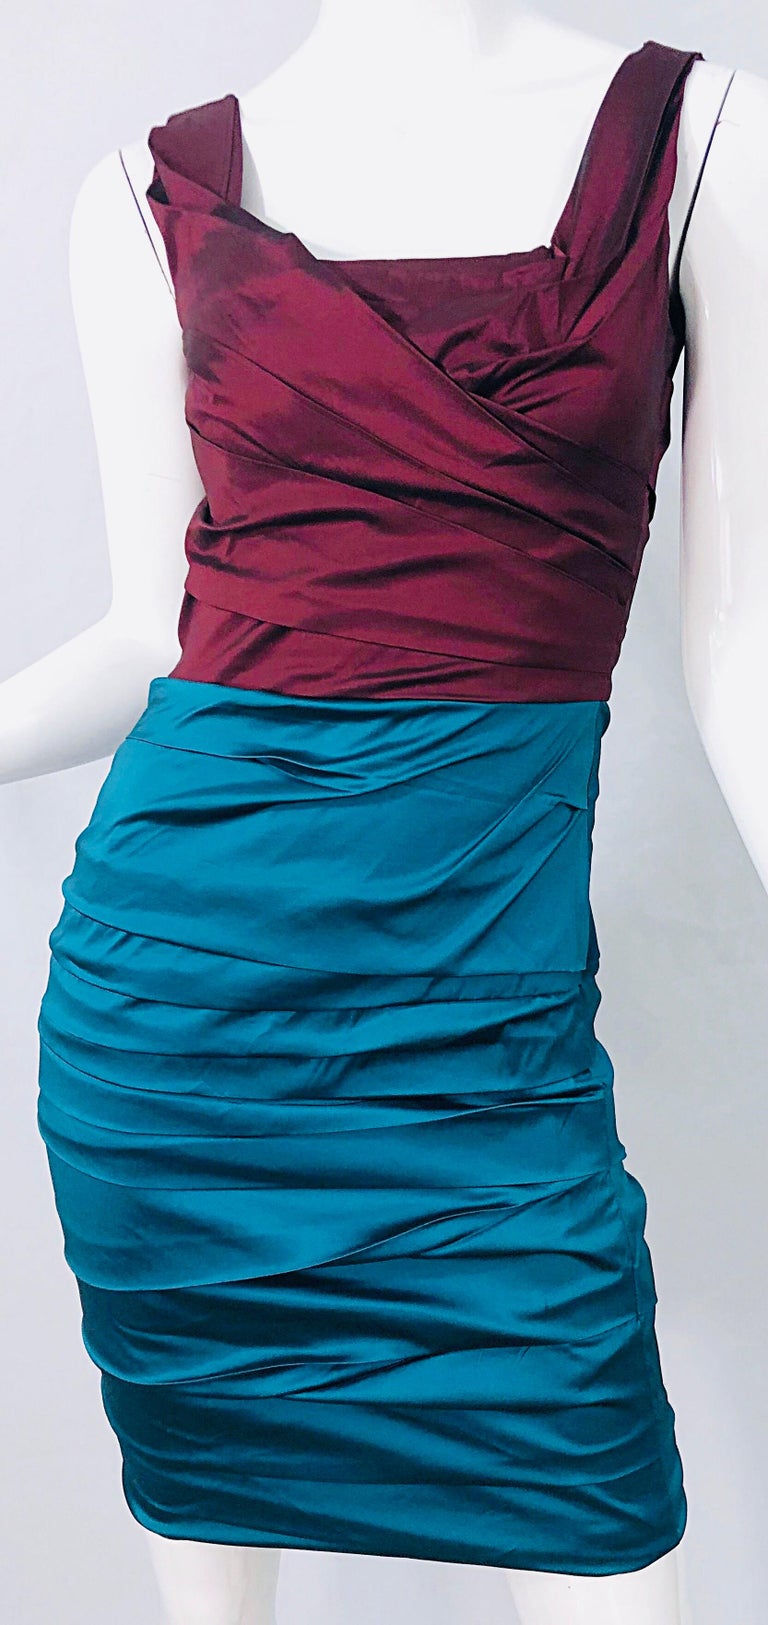 NWT Dolce and Gabbana 1990s Burgundy Turquoise Blue Colorblock Vintage Dress For Sale 4